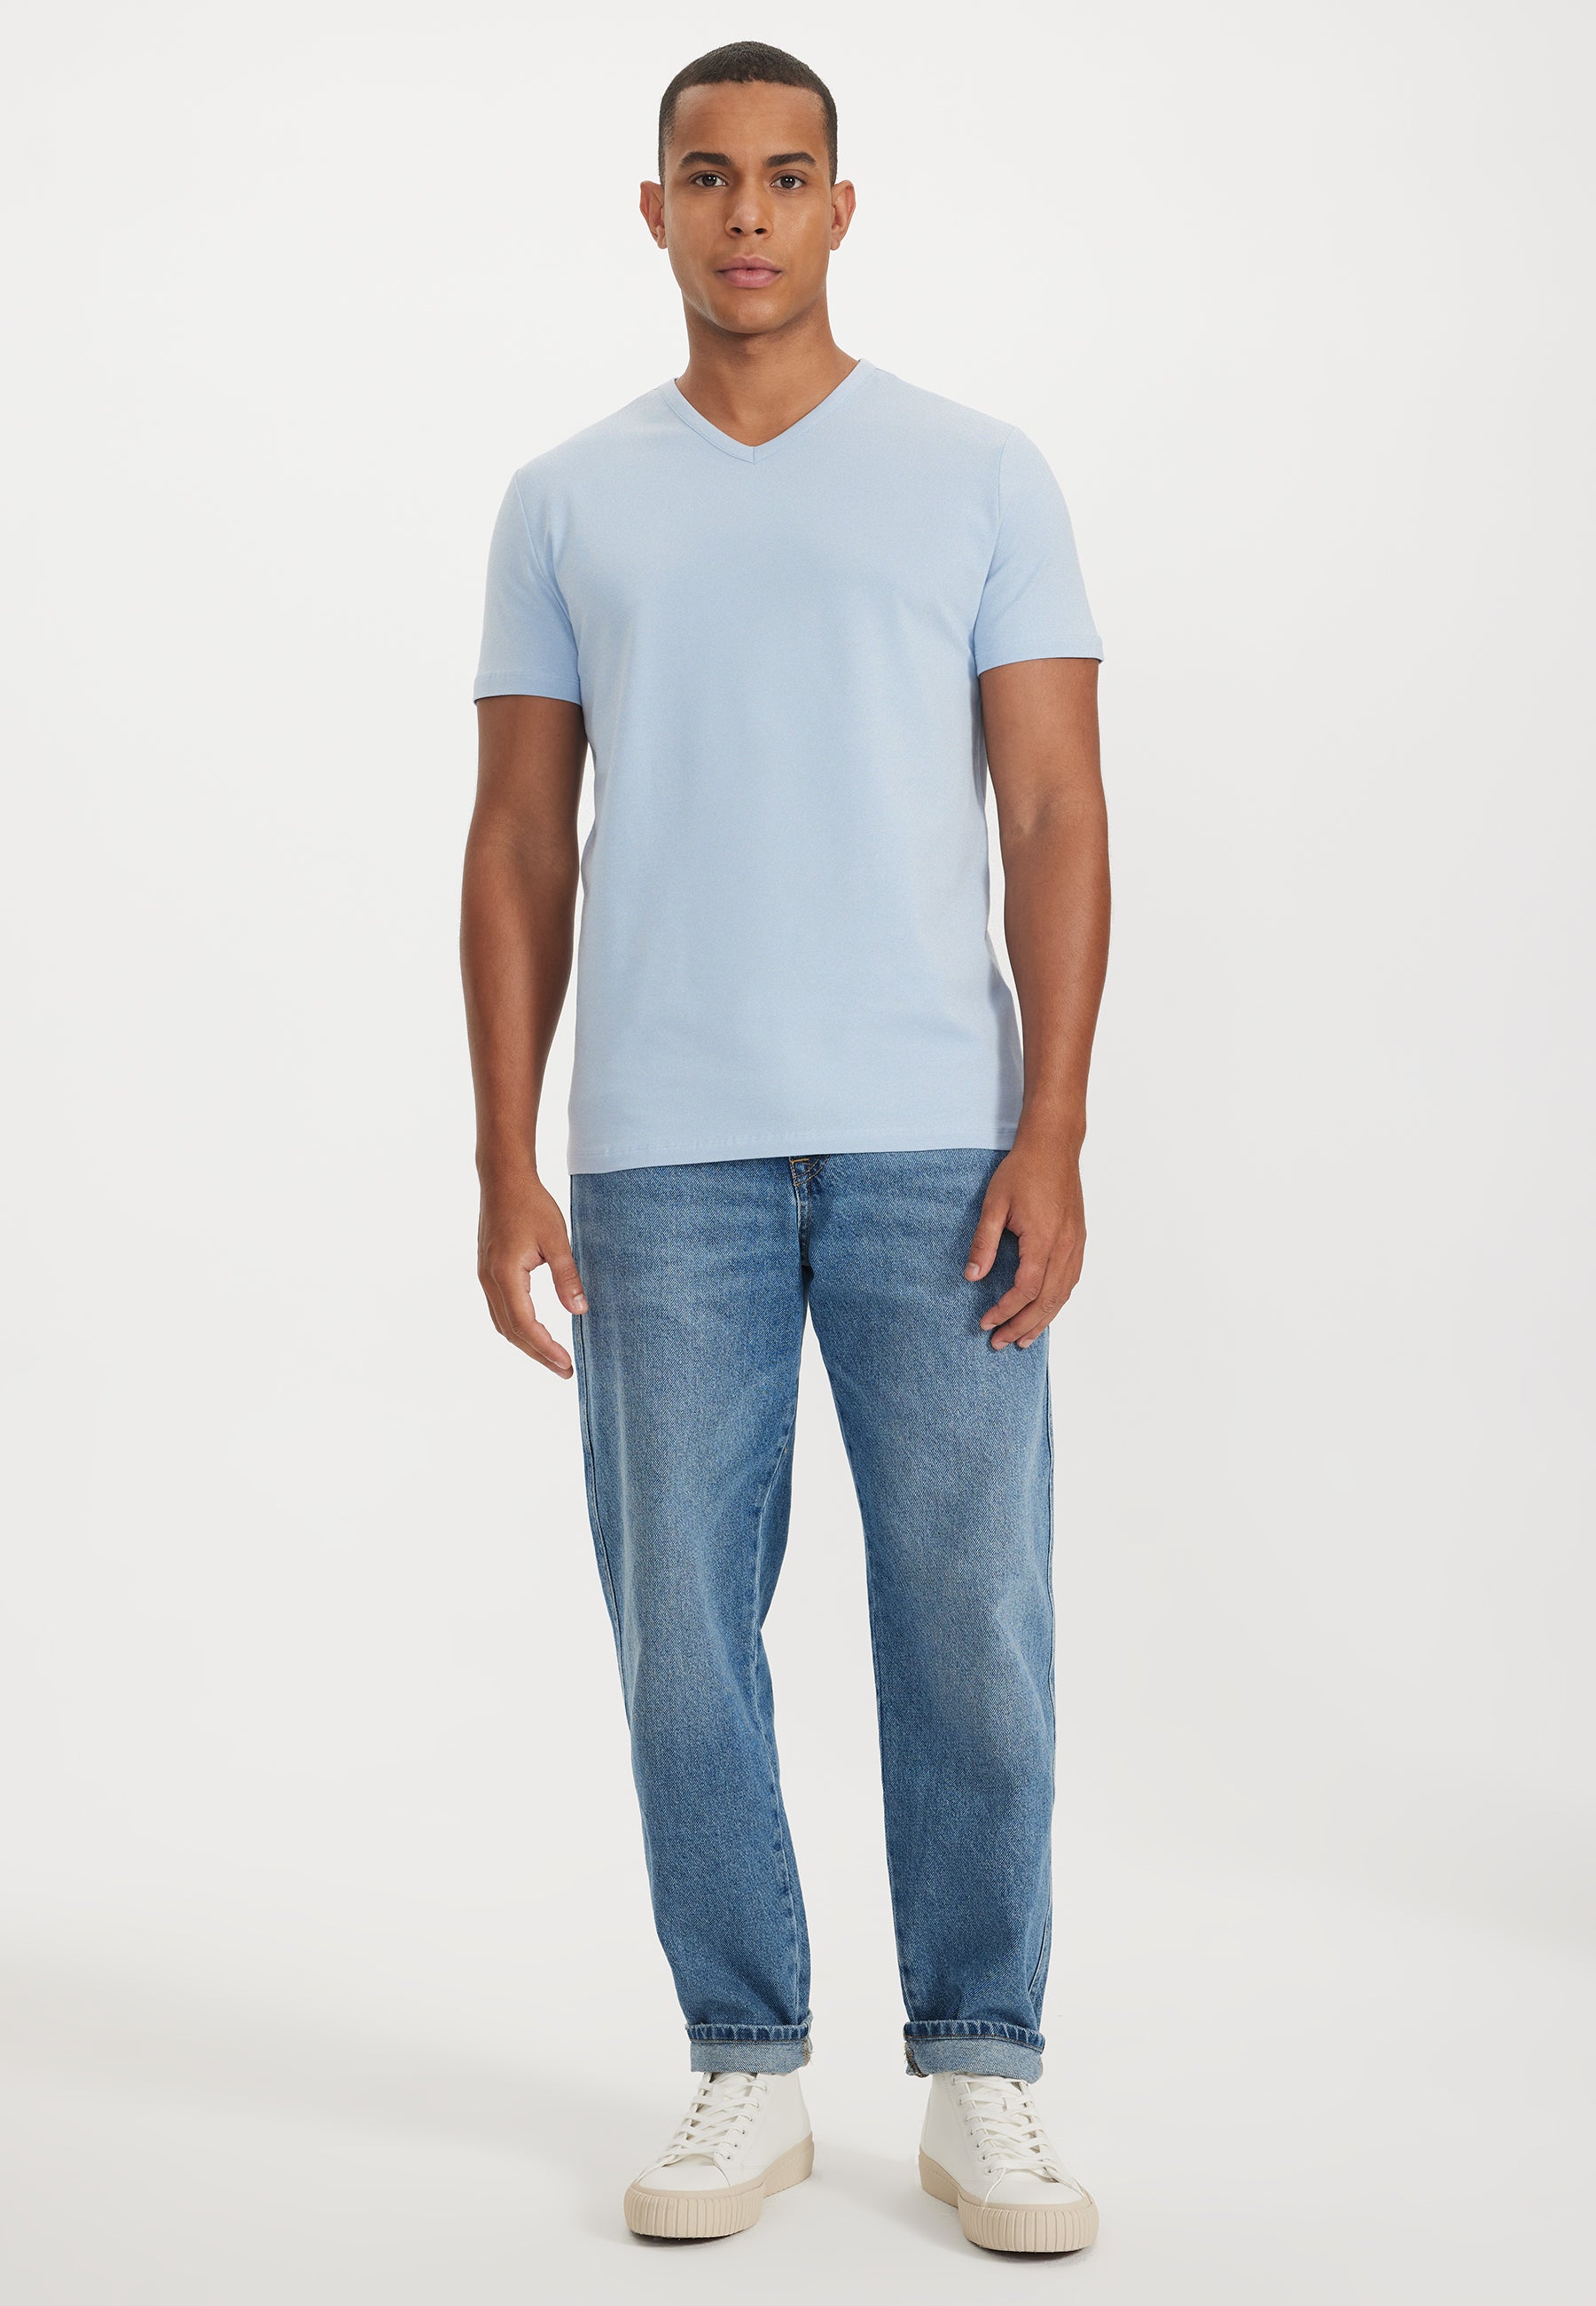 THEO V-NECK TEE in Baby Blue